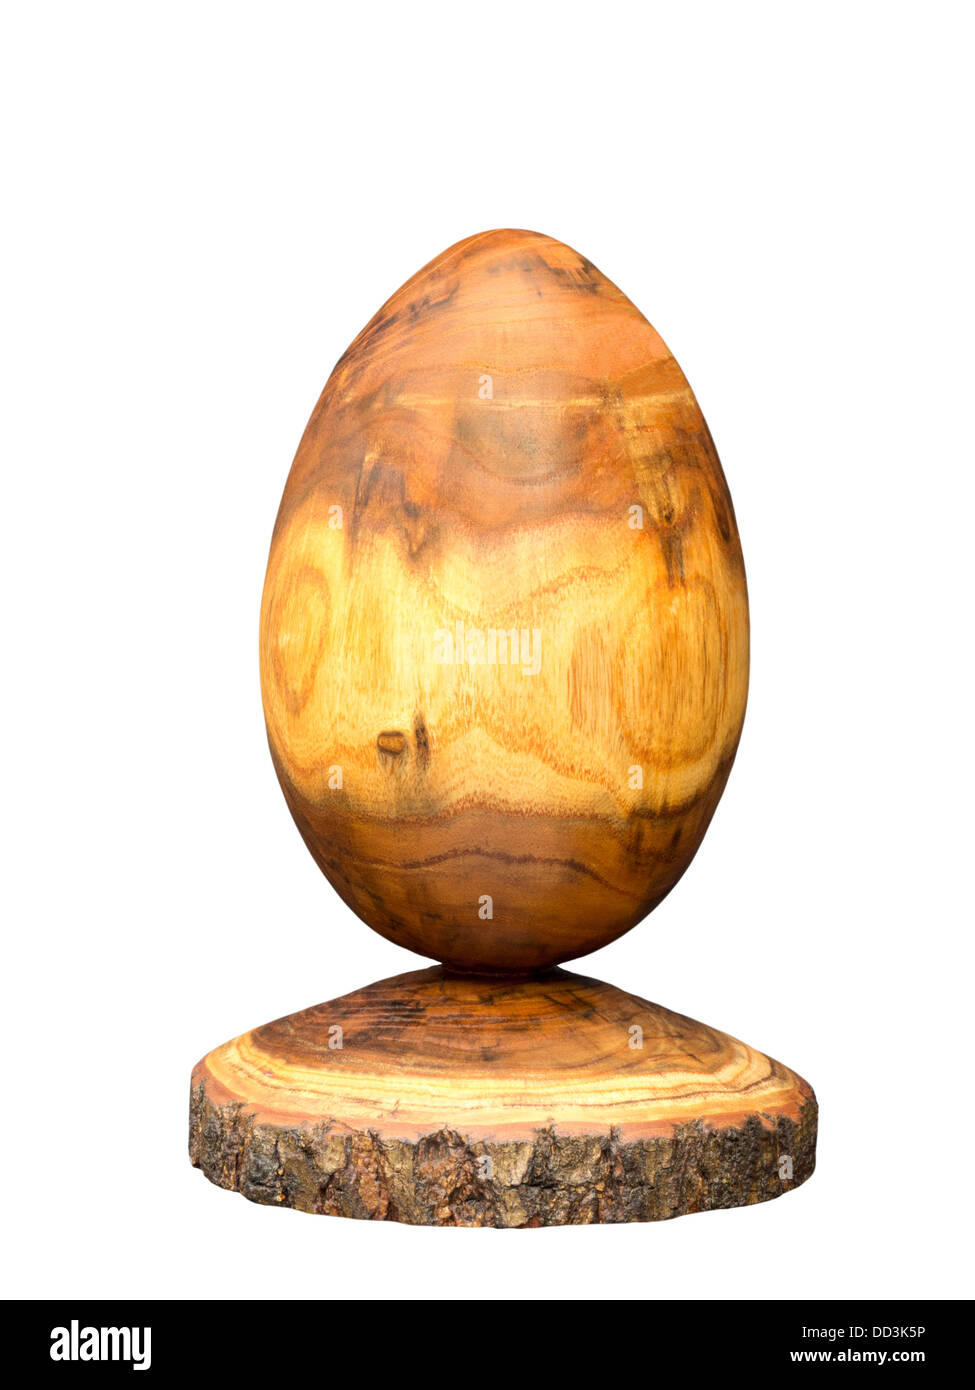 Egg made of acacia wood by means of wood turning, some bark was kept Stock Photo